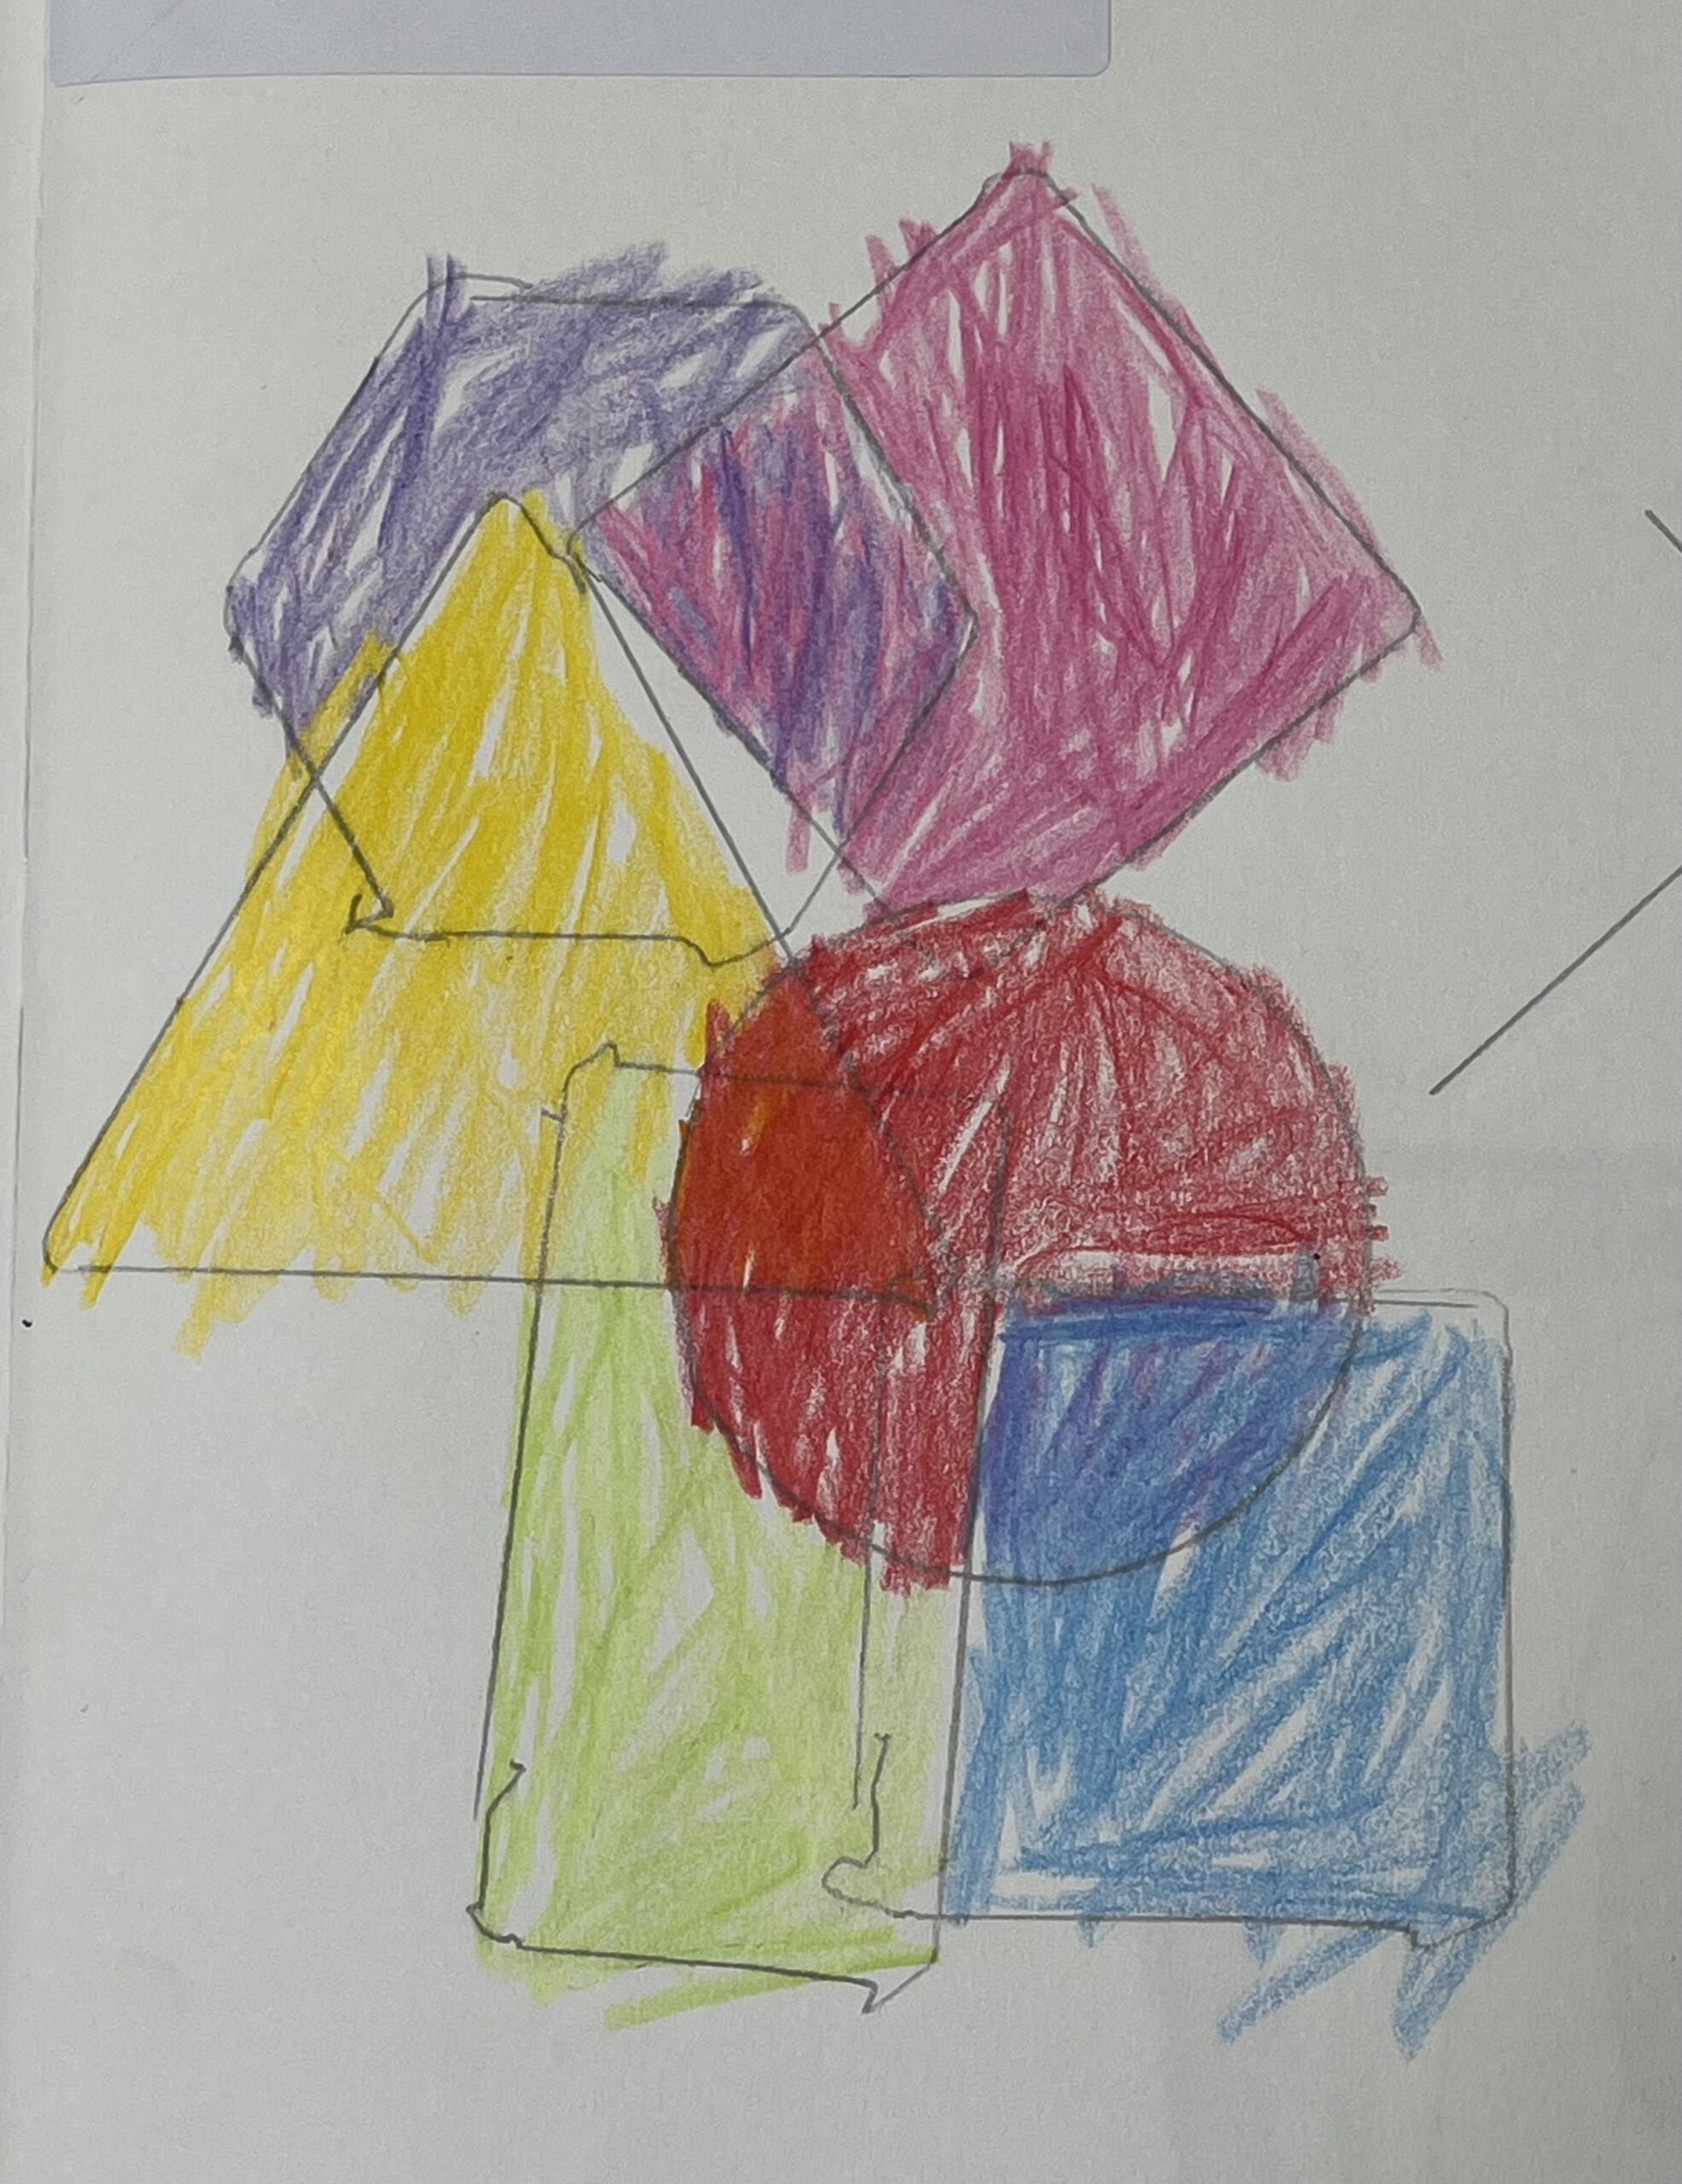 Child's drawing of shapes, coloured in using coloured pencils